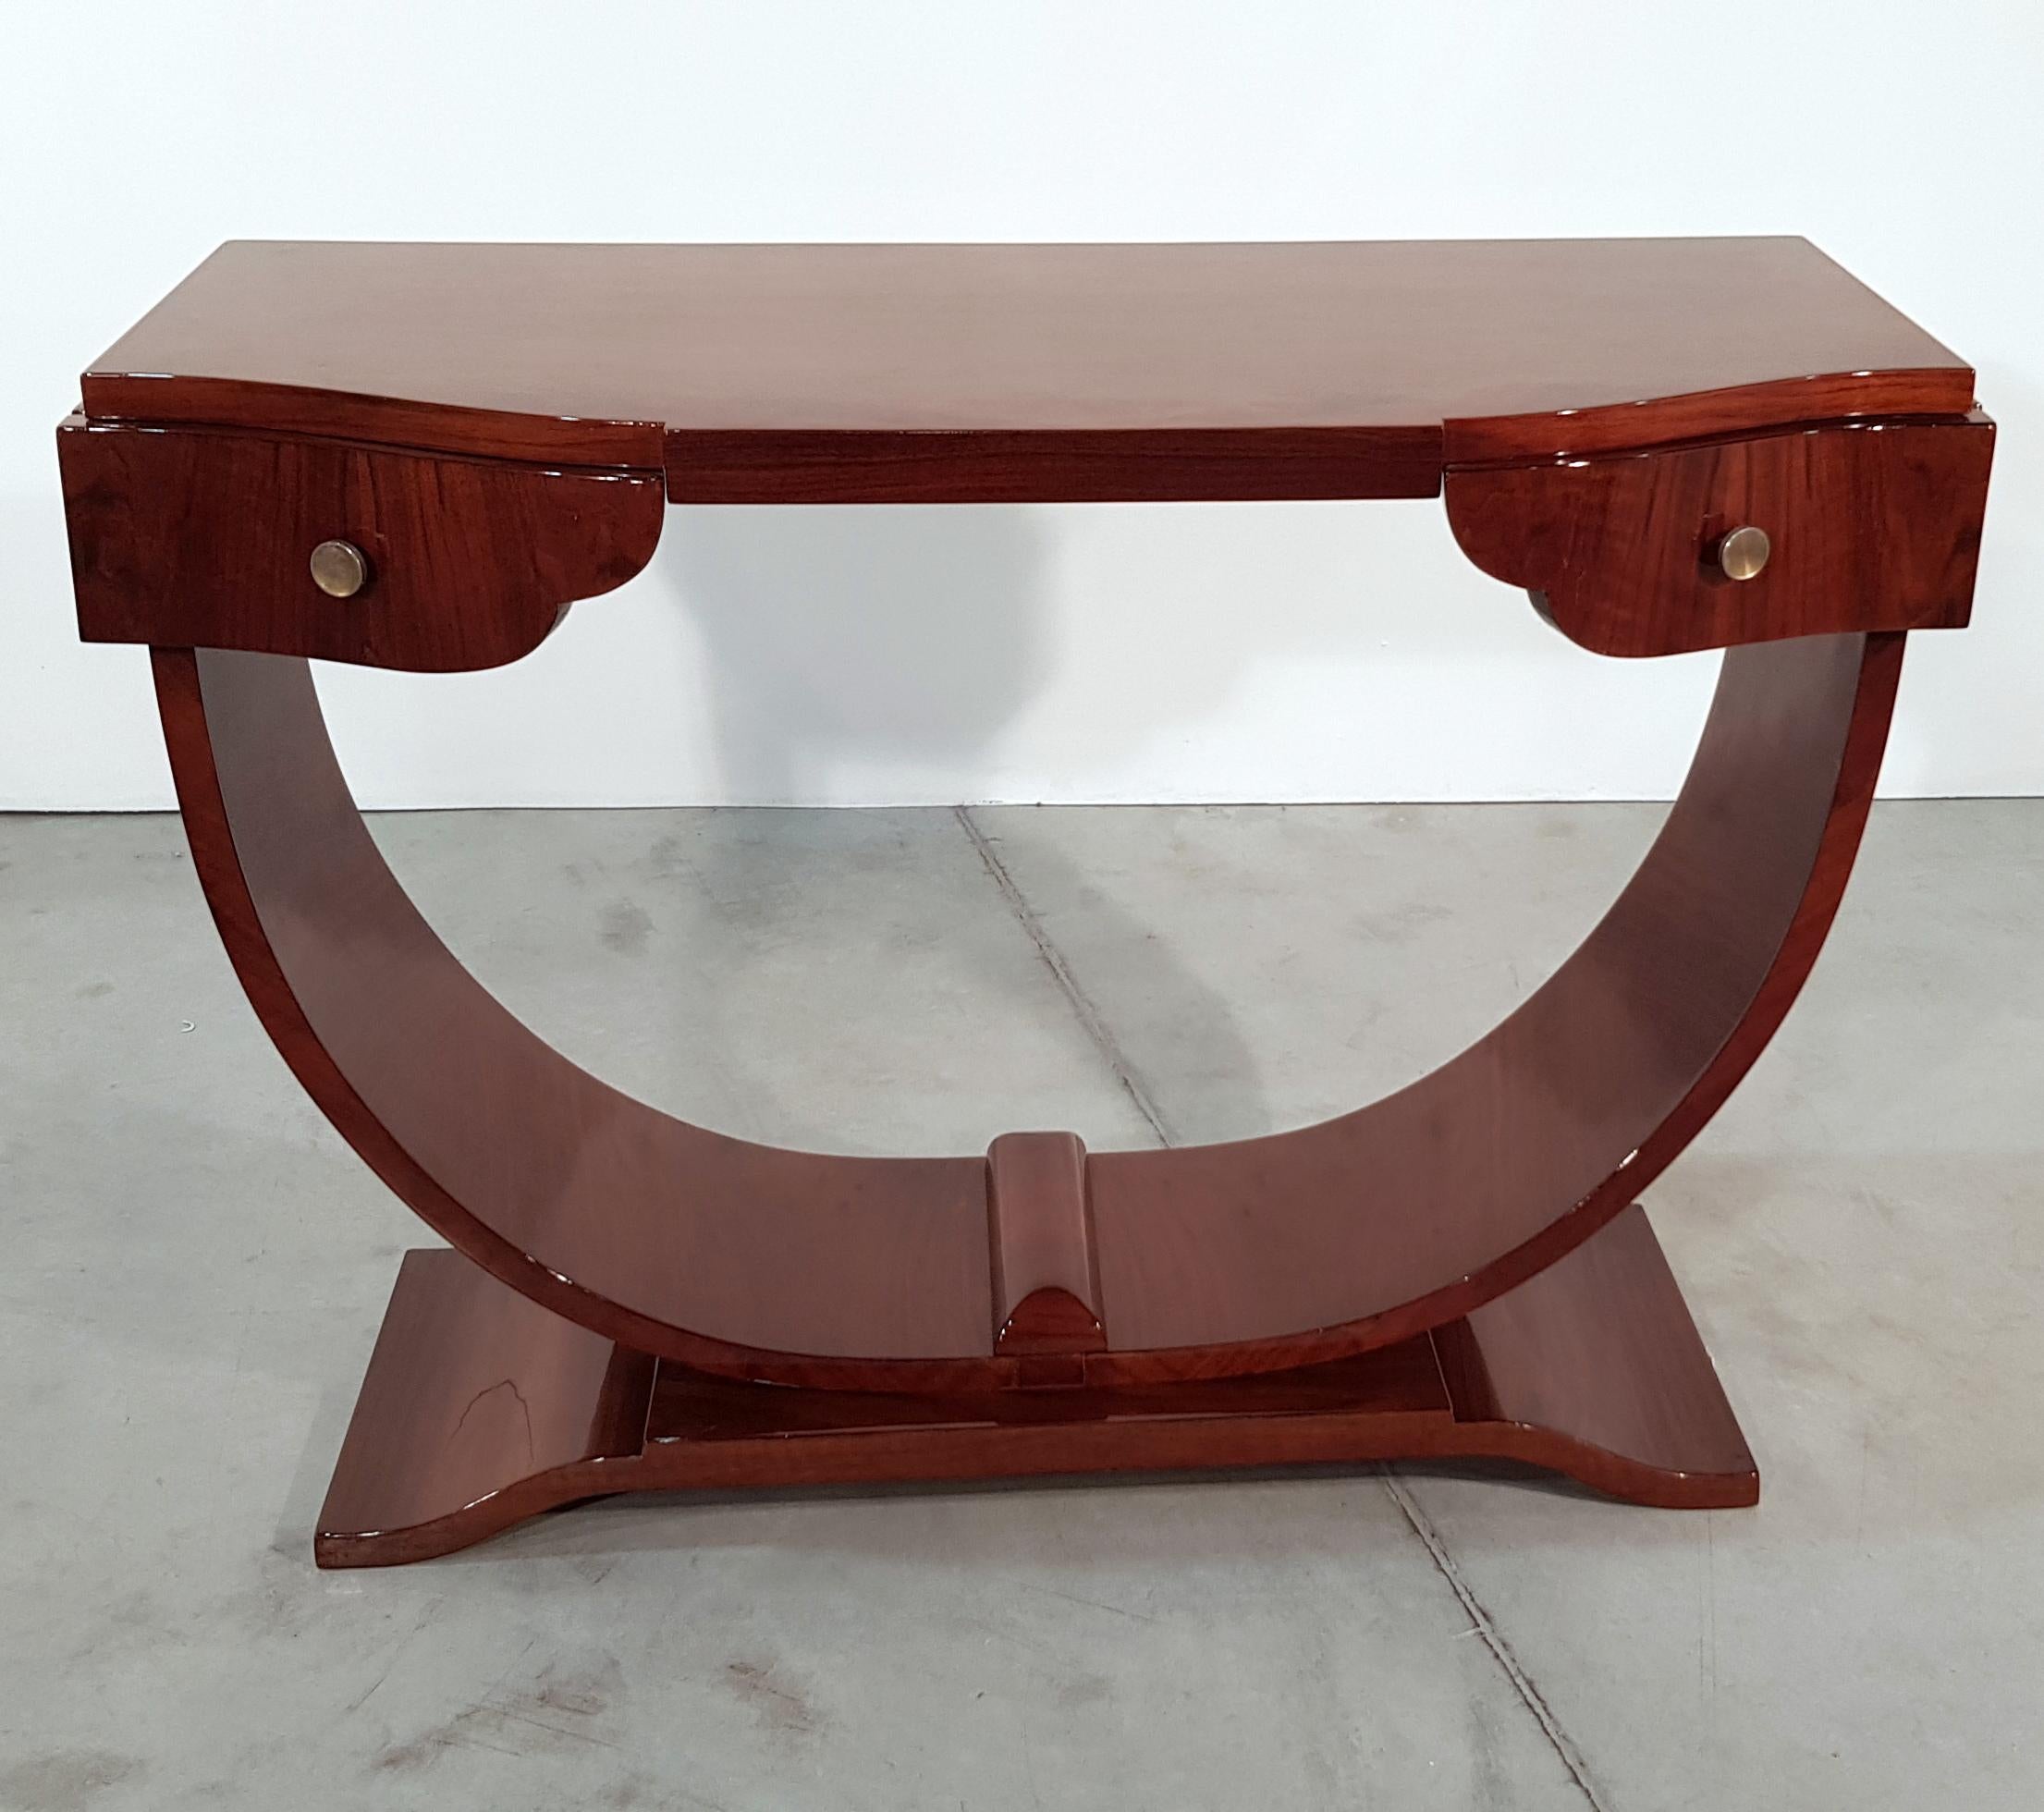 High shiny lacquered walnut veneered console table with two drawers and U-shape legs. Original handles. France, 1930s. Recently restored.